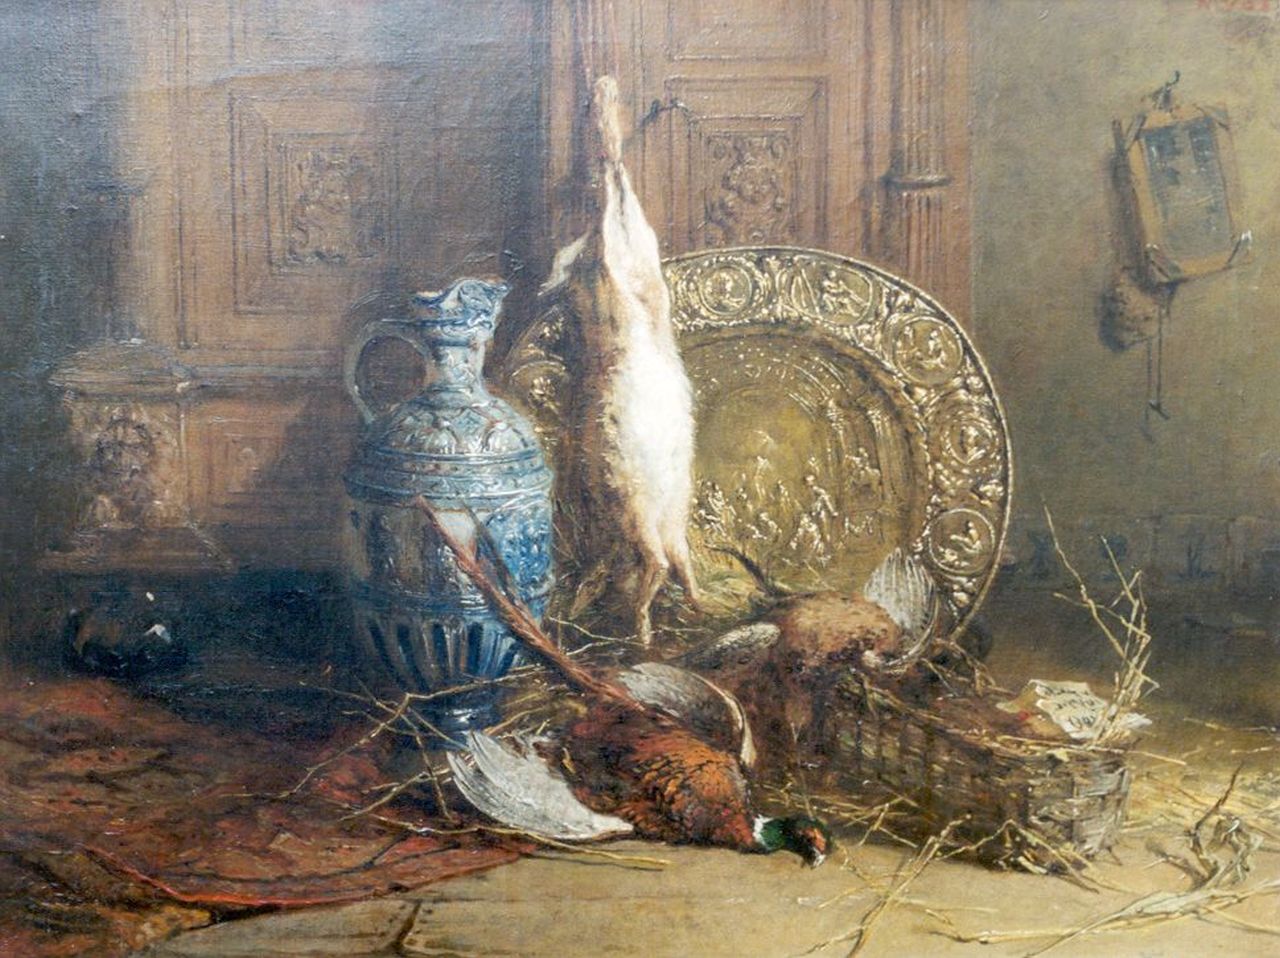 Vos M.  | Maria Vos, A hunting still life, oil on canvas 46.2 x 61.1 cm, signed u.r.